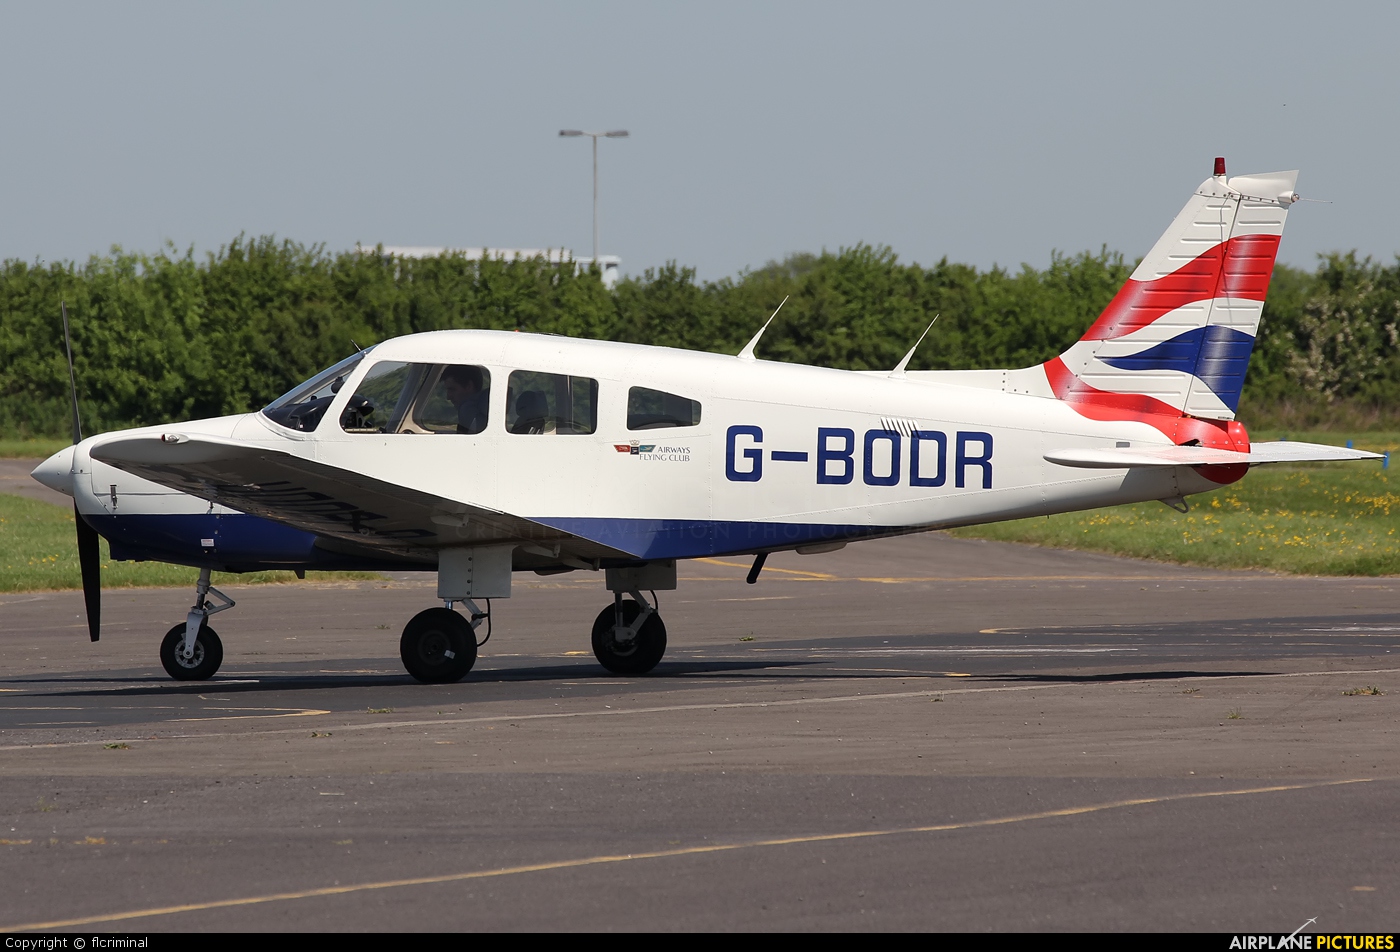 British Airways Flying Club G-BODR aircraft at Wycombe Air Park - Booker